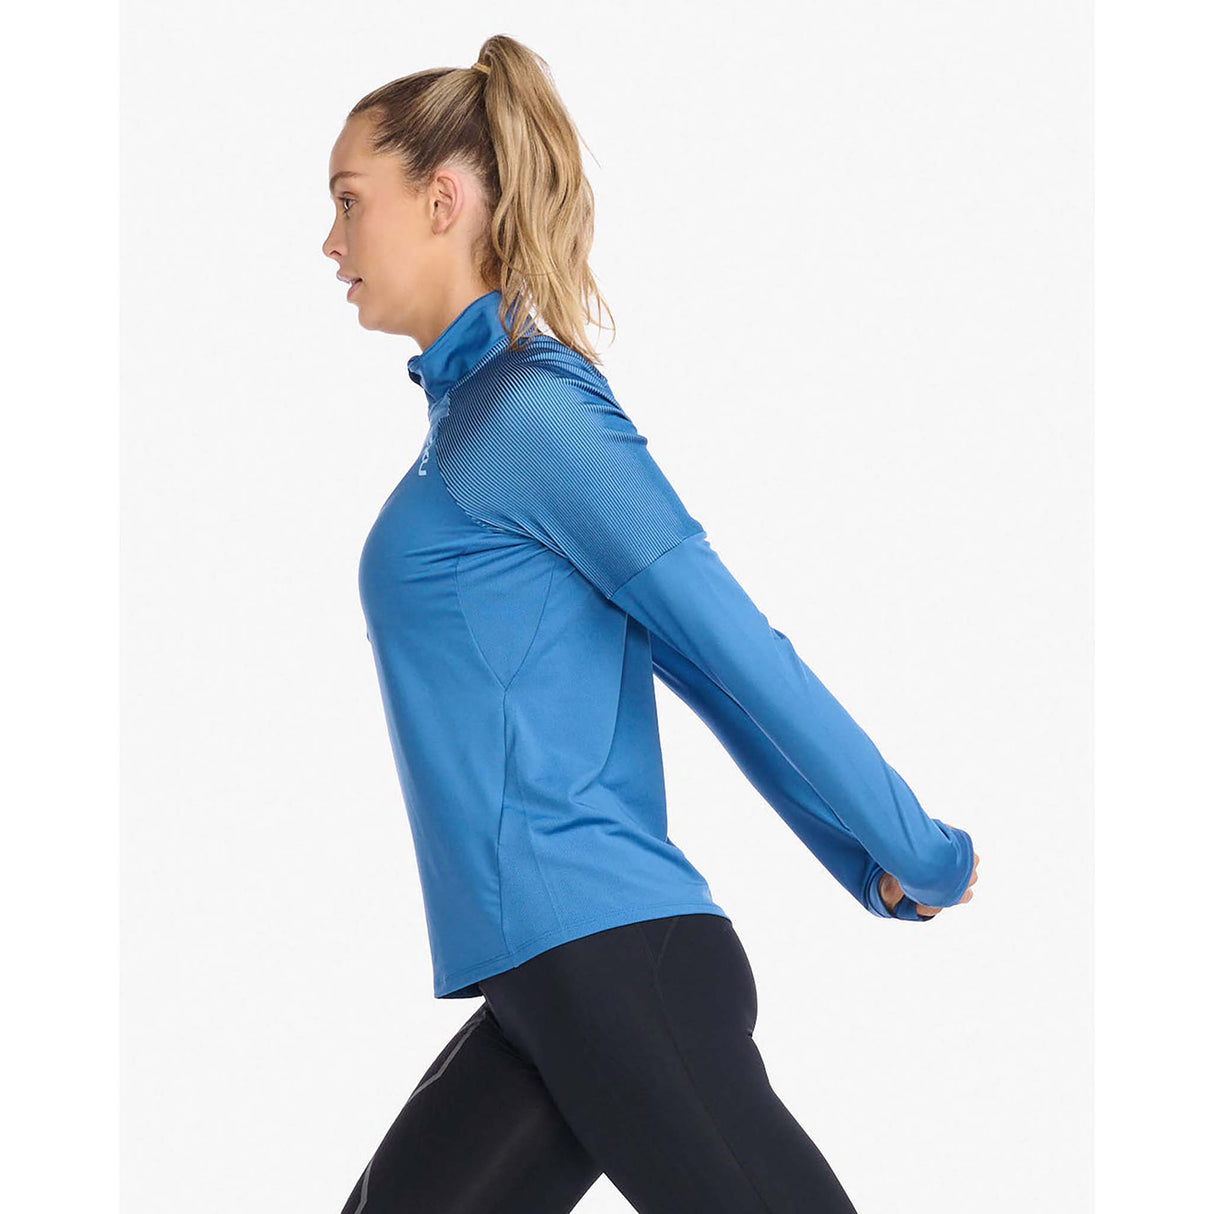 2XU Light Speed chandail manches longues 1/2 Zip starling réfléchissant femme lateral